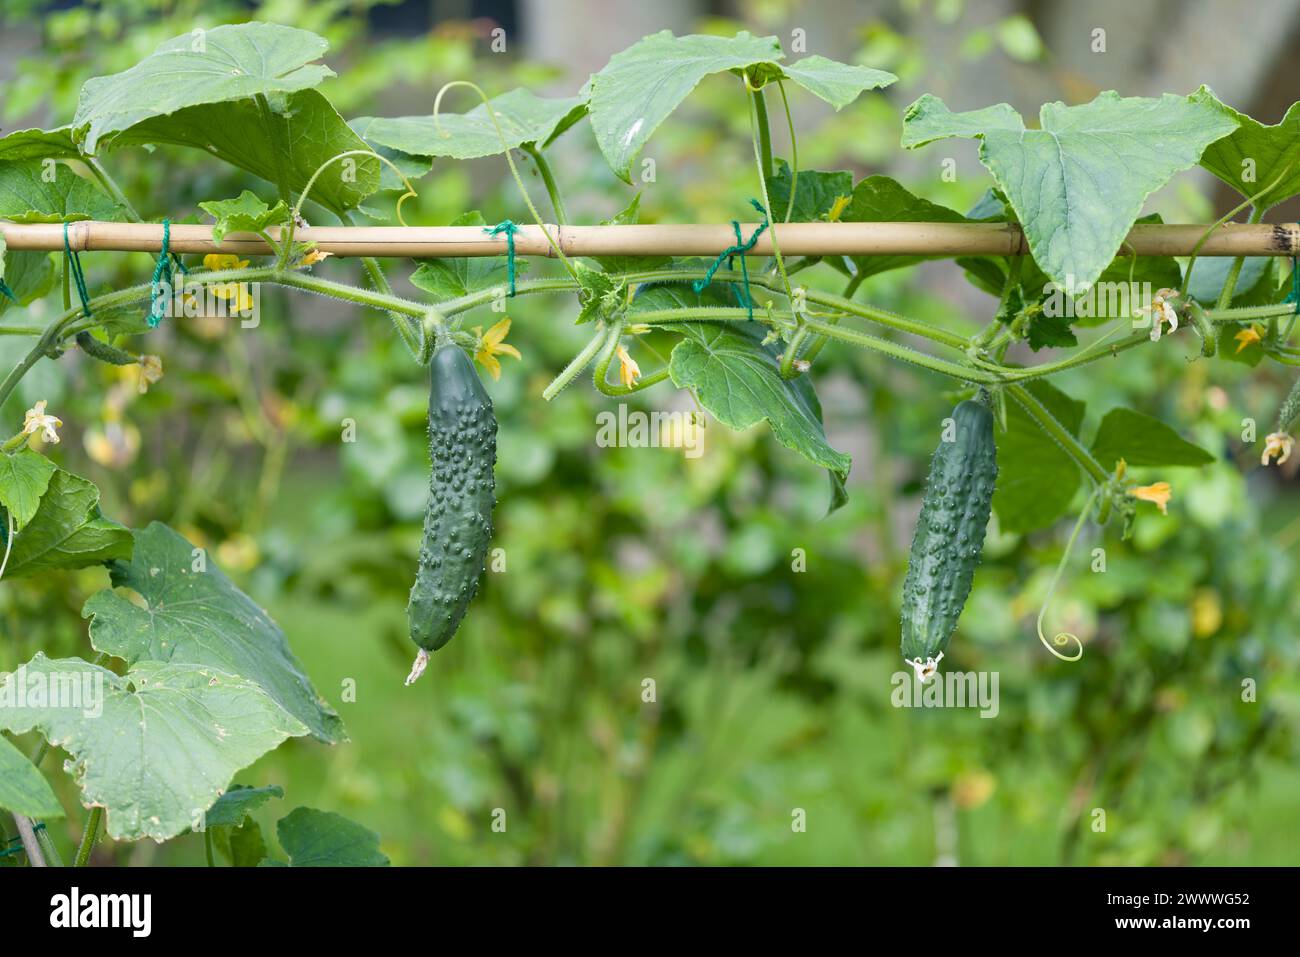 Cucumbers (Bedfordshire Prize ridged) growing outdoors on a cucumber plant in an English garden in summer, UK Stock Photo